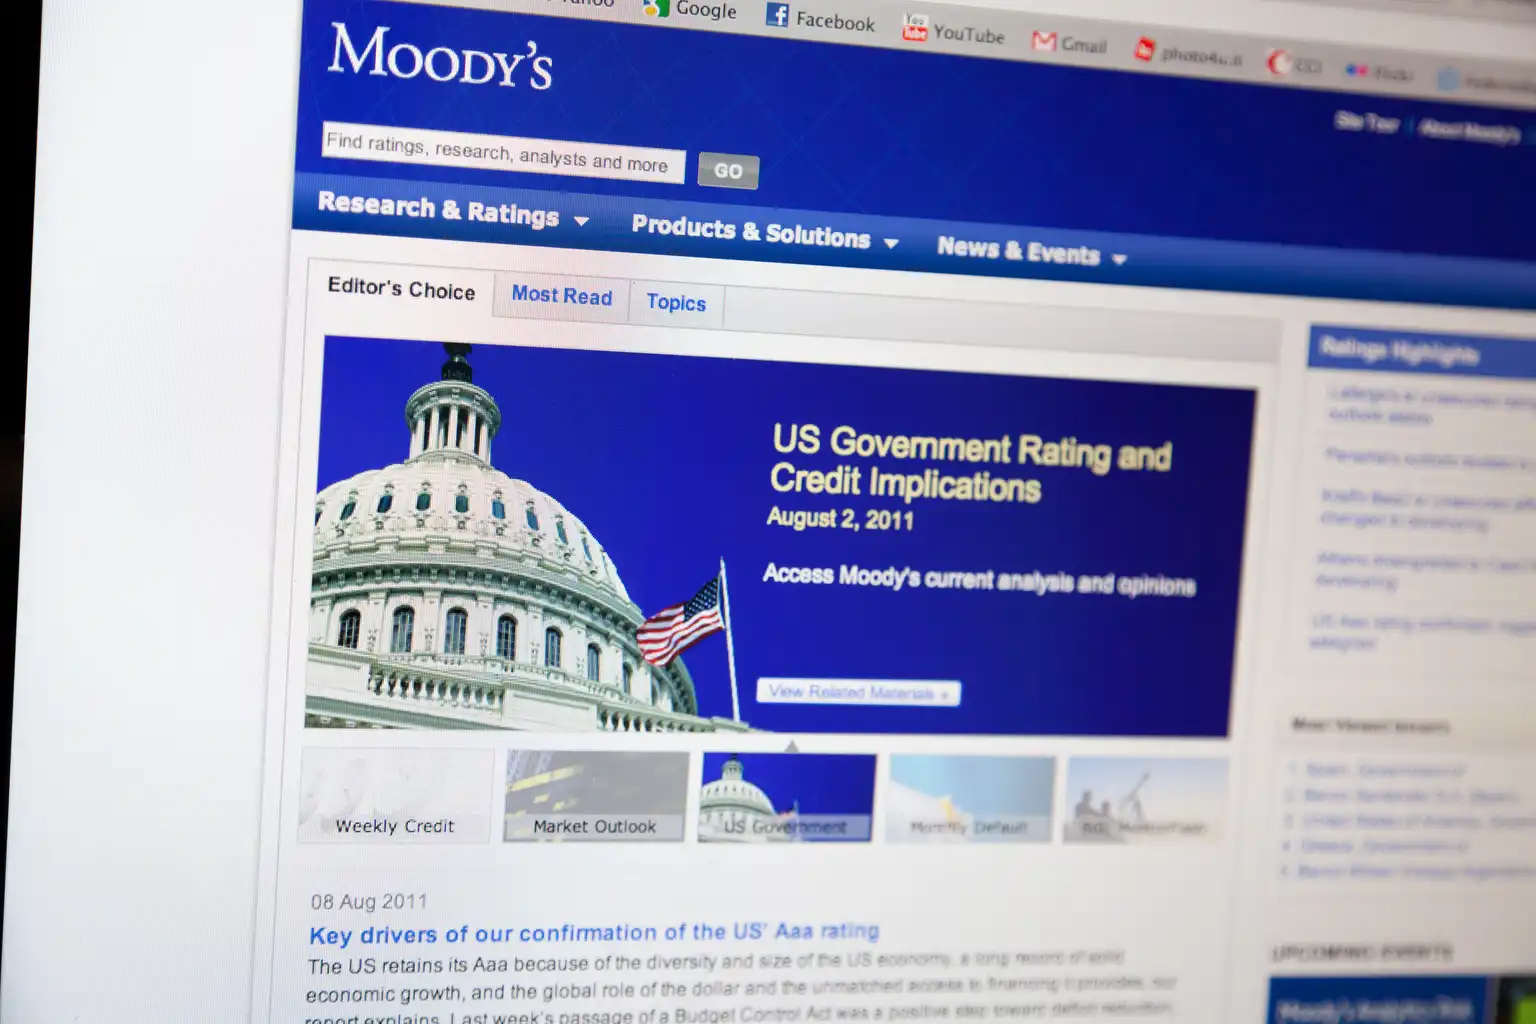 Moody's: The Valuation Doesn't Convince Me - Seeking Alpha